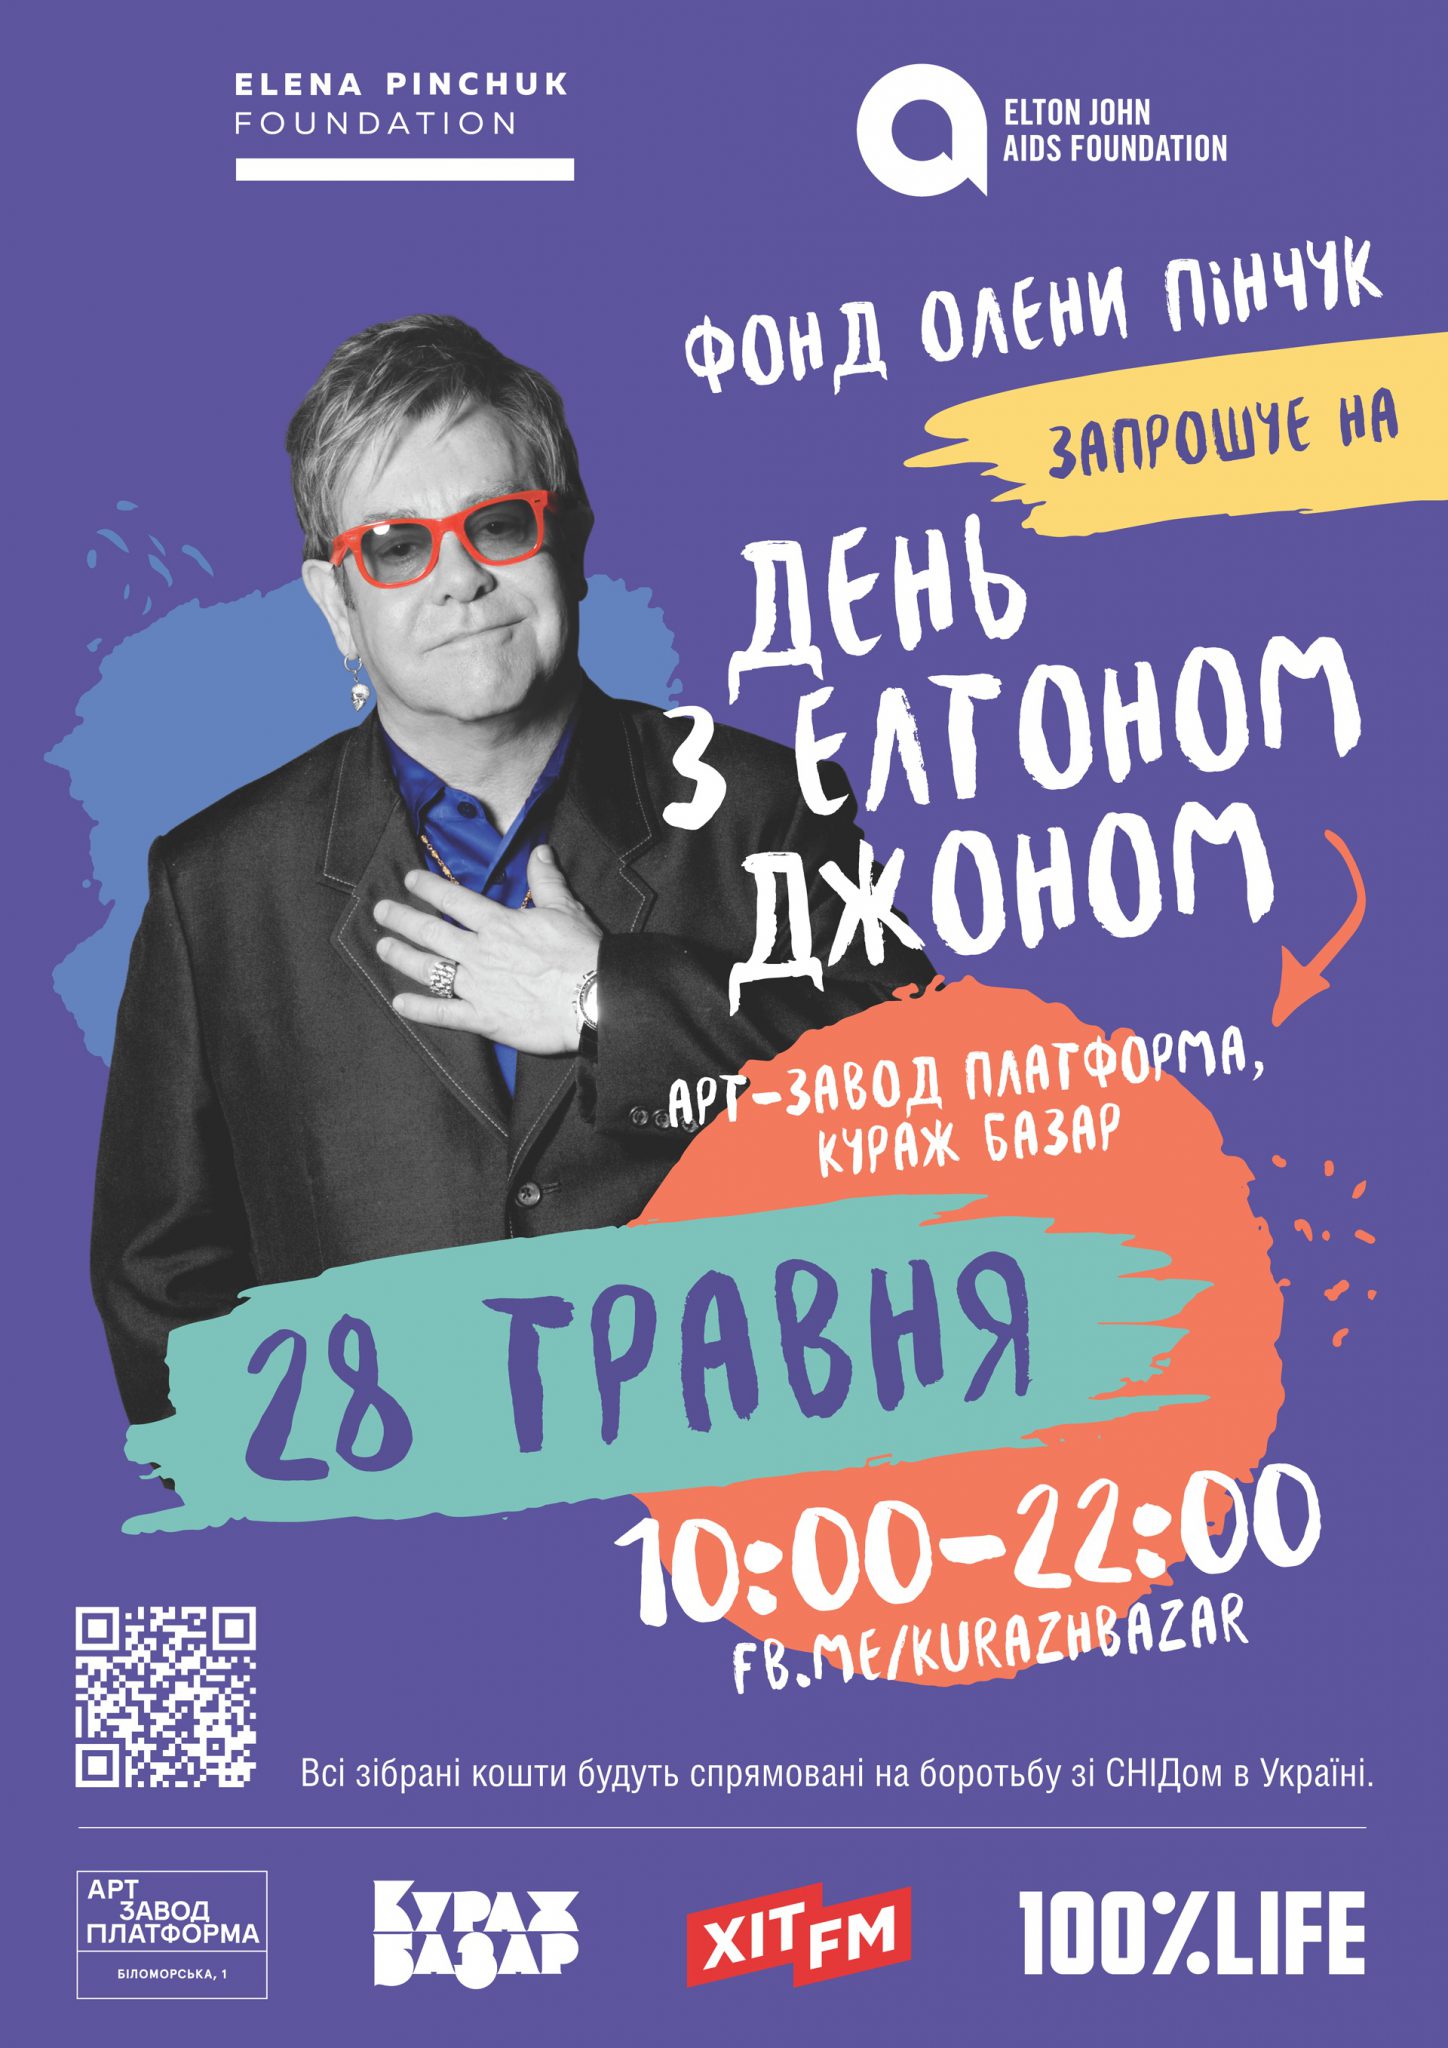 The Day will be held in Kyiv with Elton John